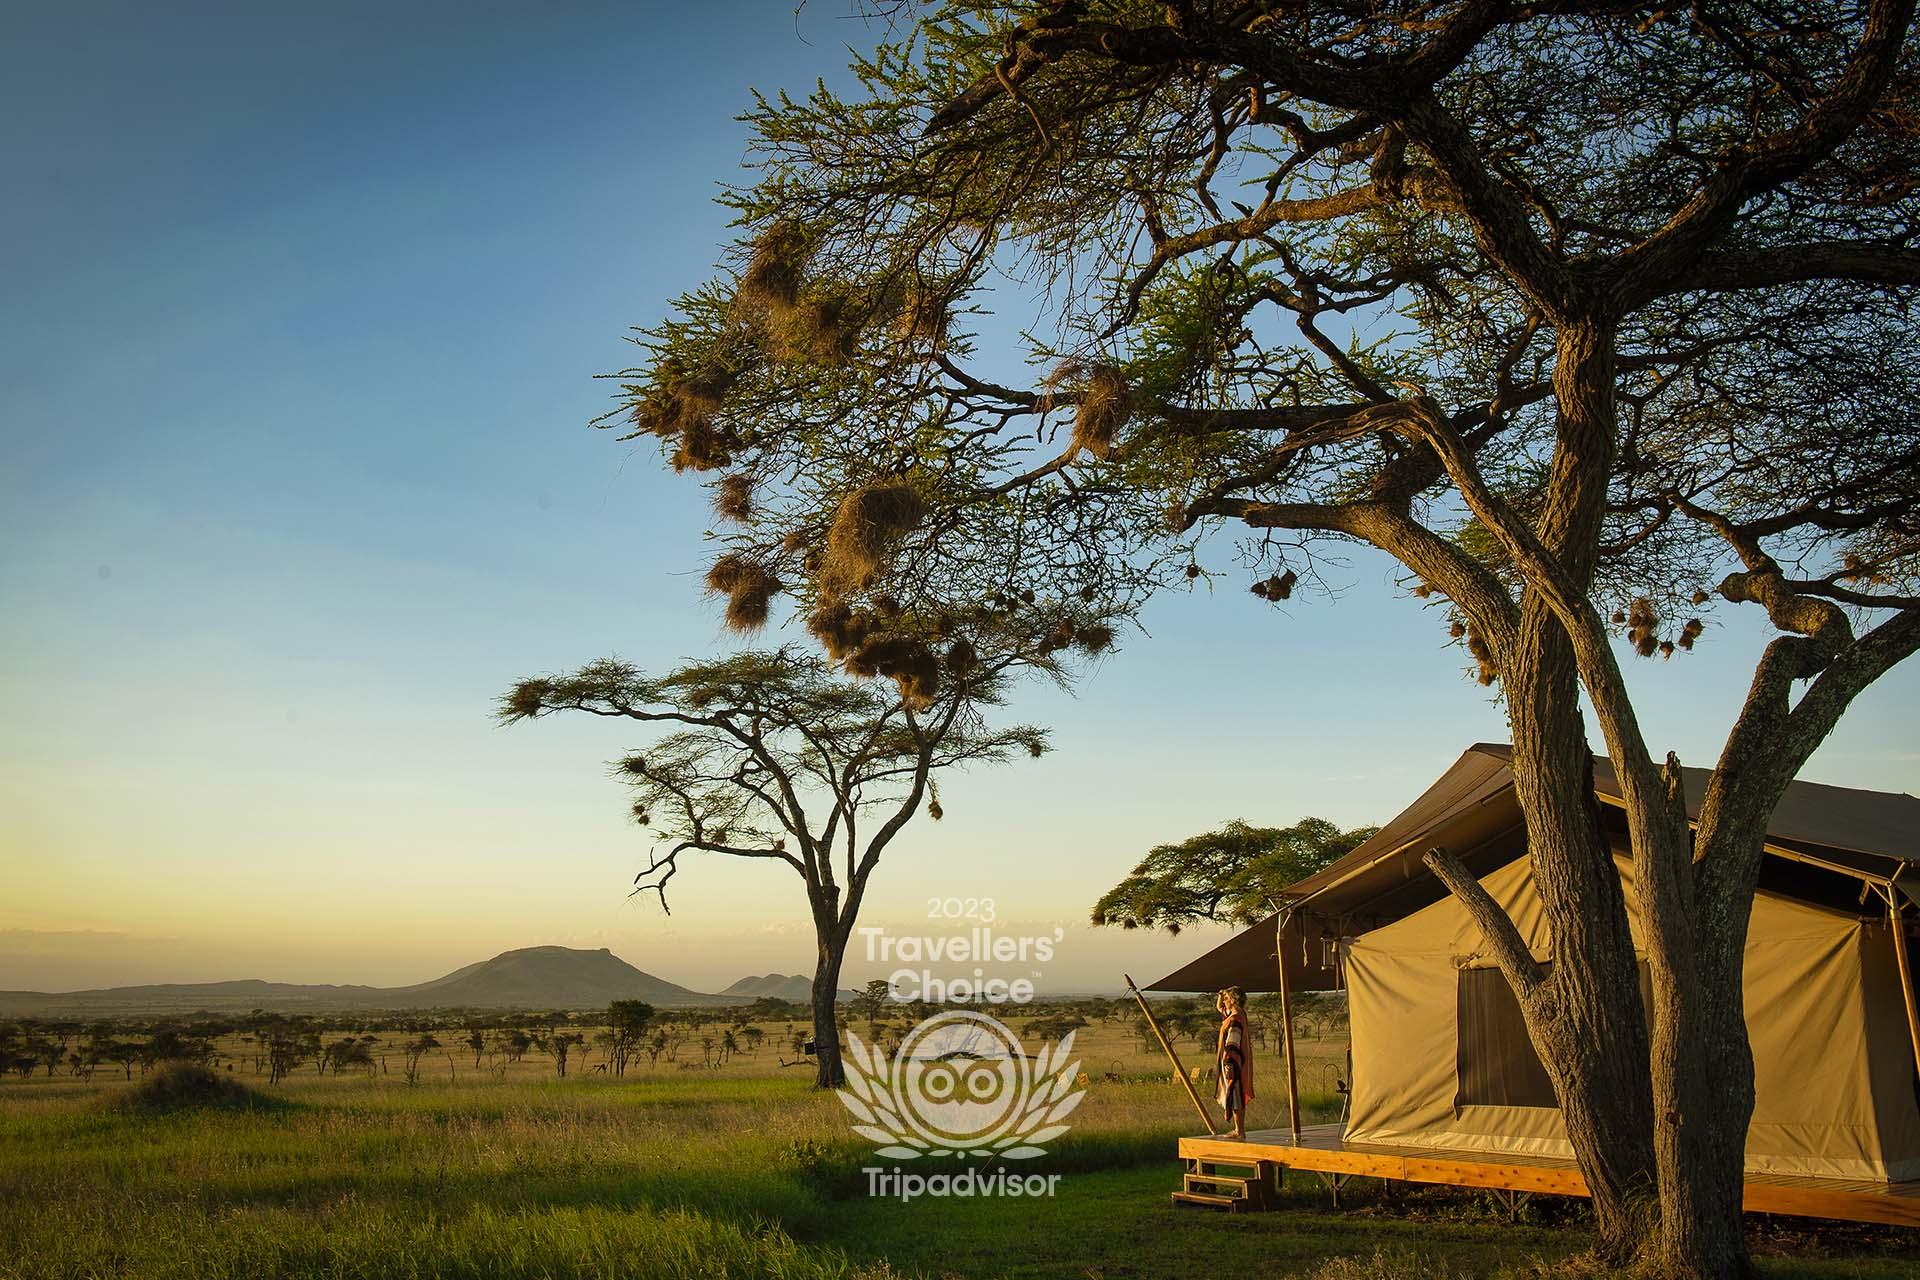 Enjoy this view from your private 5* tent at Siringit Serengeti Camp in the middle of the Serengeti National Park, Tanzania